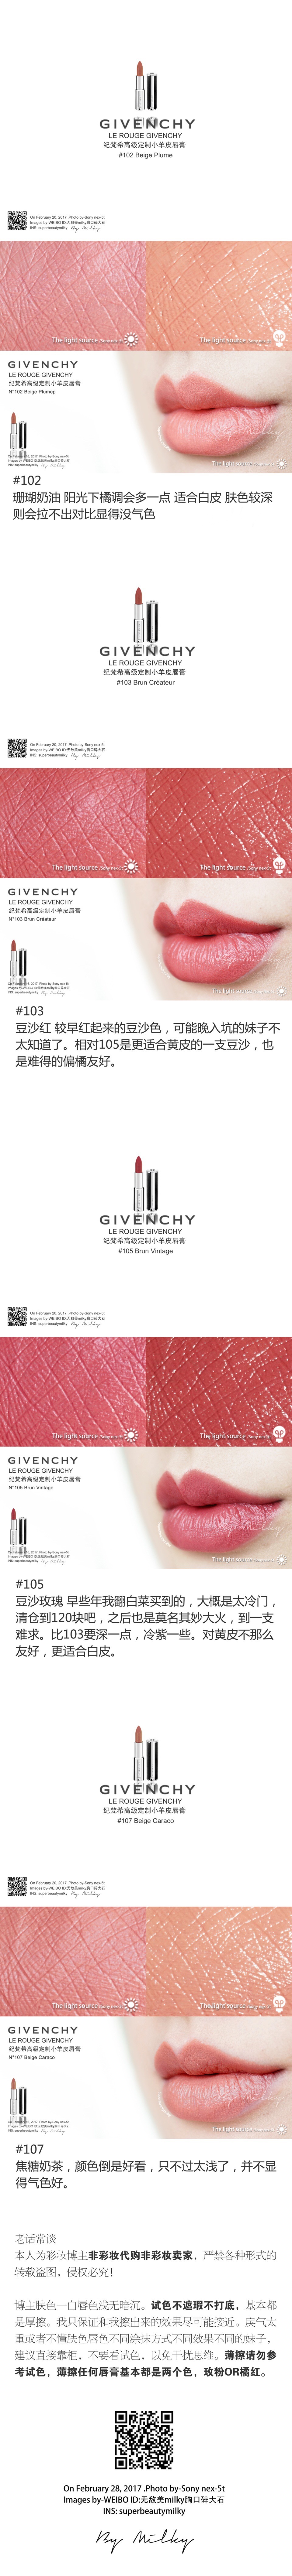 GIVENCHY LE ROUGE GIVENCHY/纪梵希高级定制小羊皮唇膏102/103/105/107/108/201/202/204/205/209/210/211/3 ...